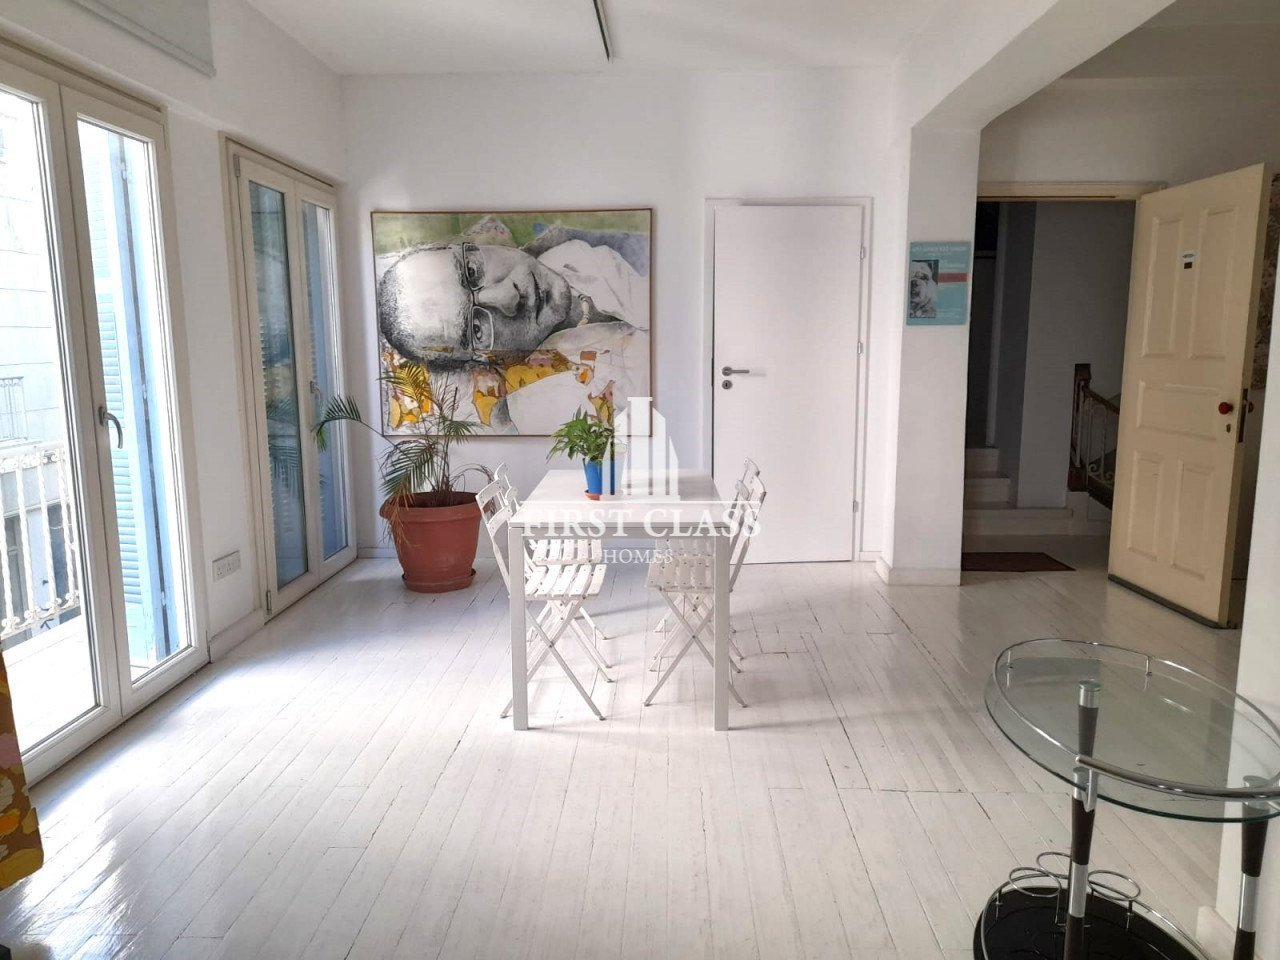 Property for Rent: Apartment (Flat) in City Center, Nicosia for Rent | Key Realtor Cyprus